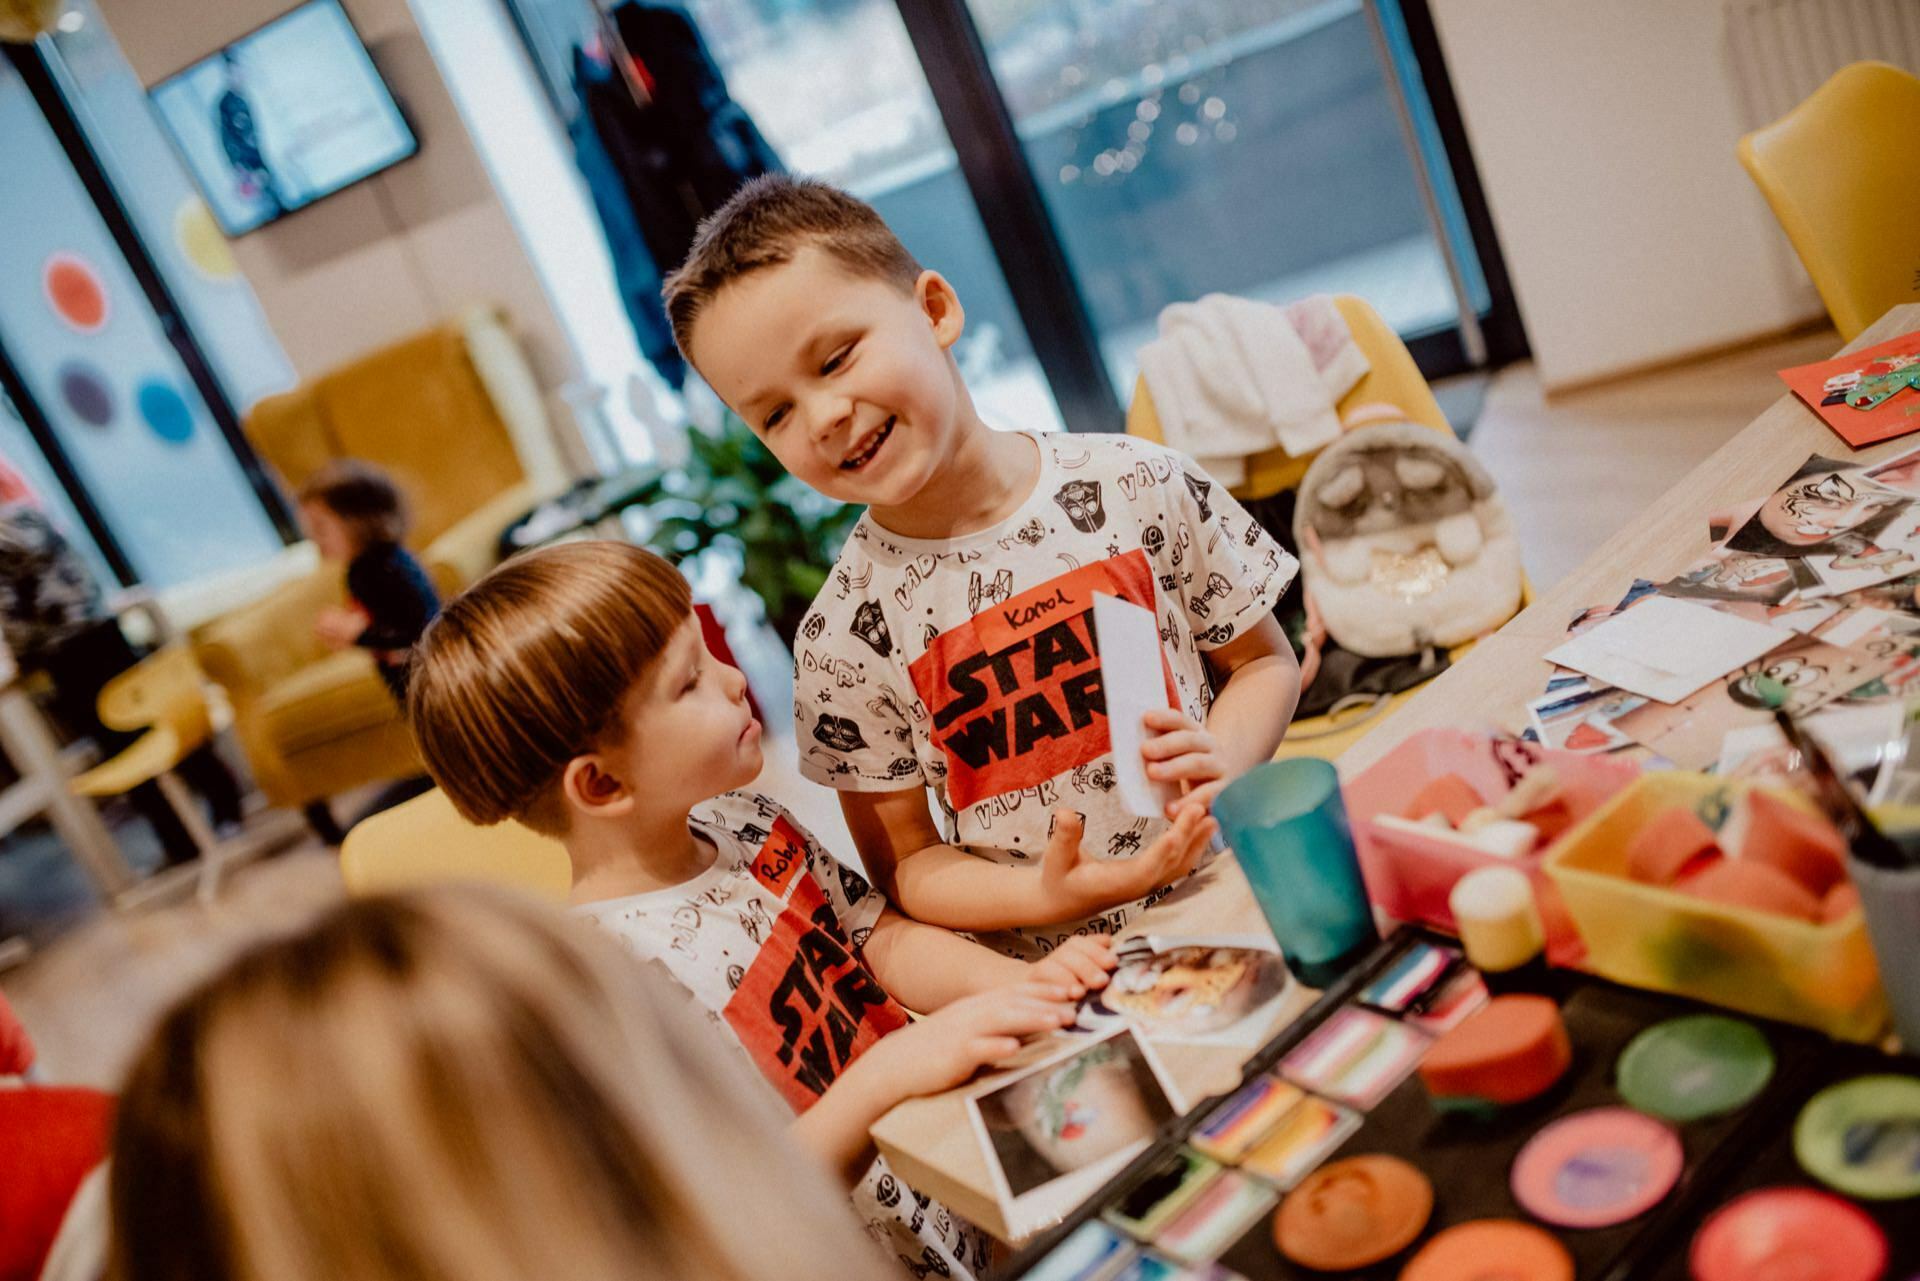 Kids in STAR WARS T-shirts talk at a face painting table